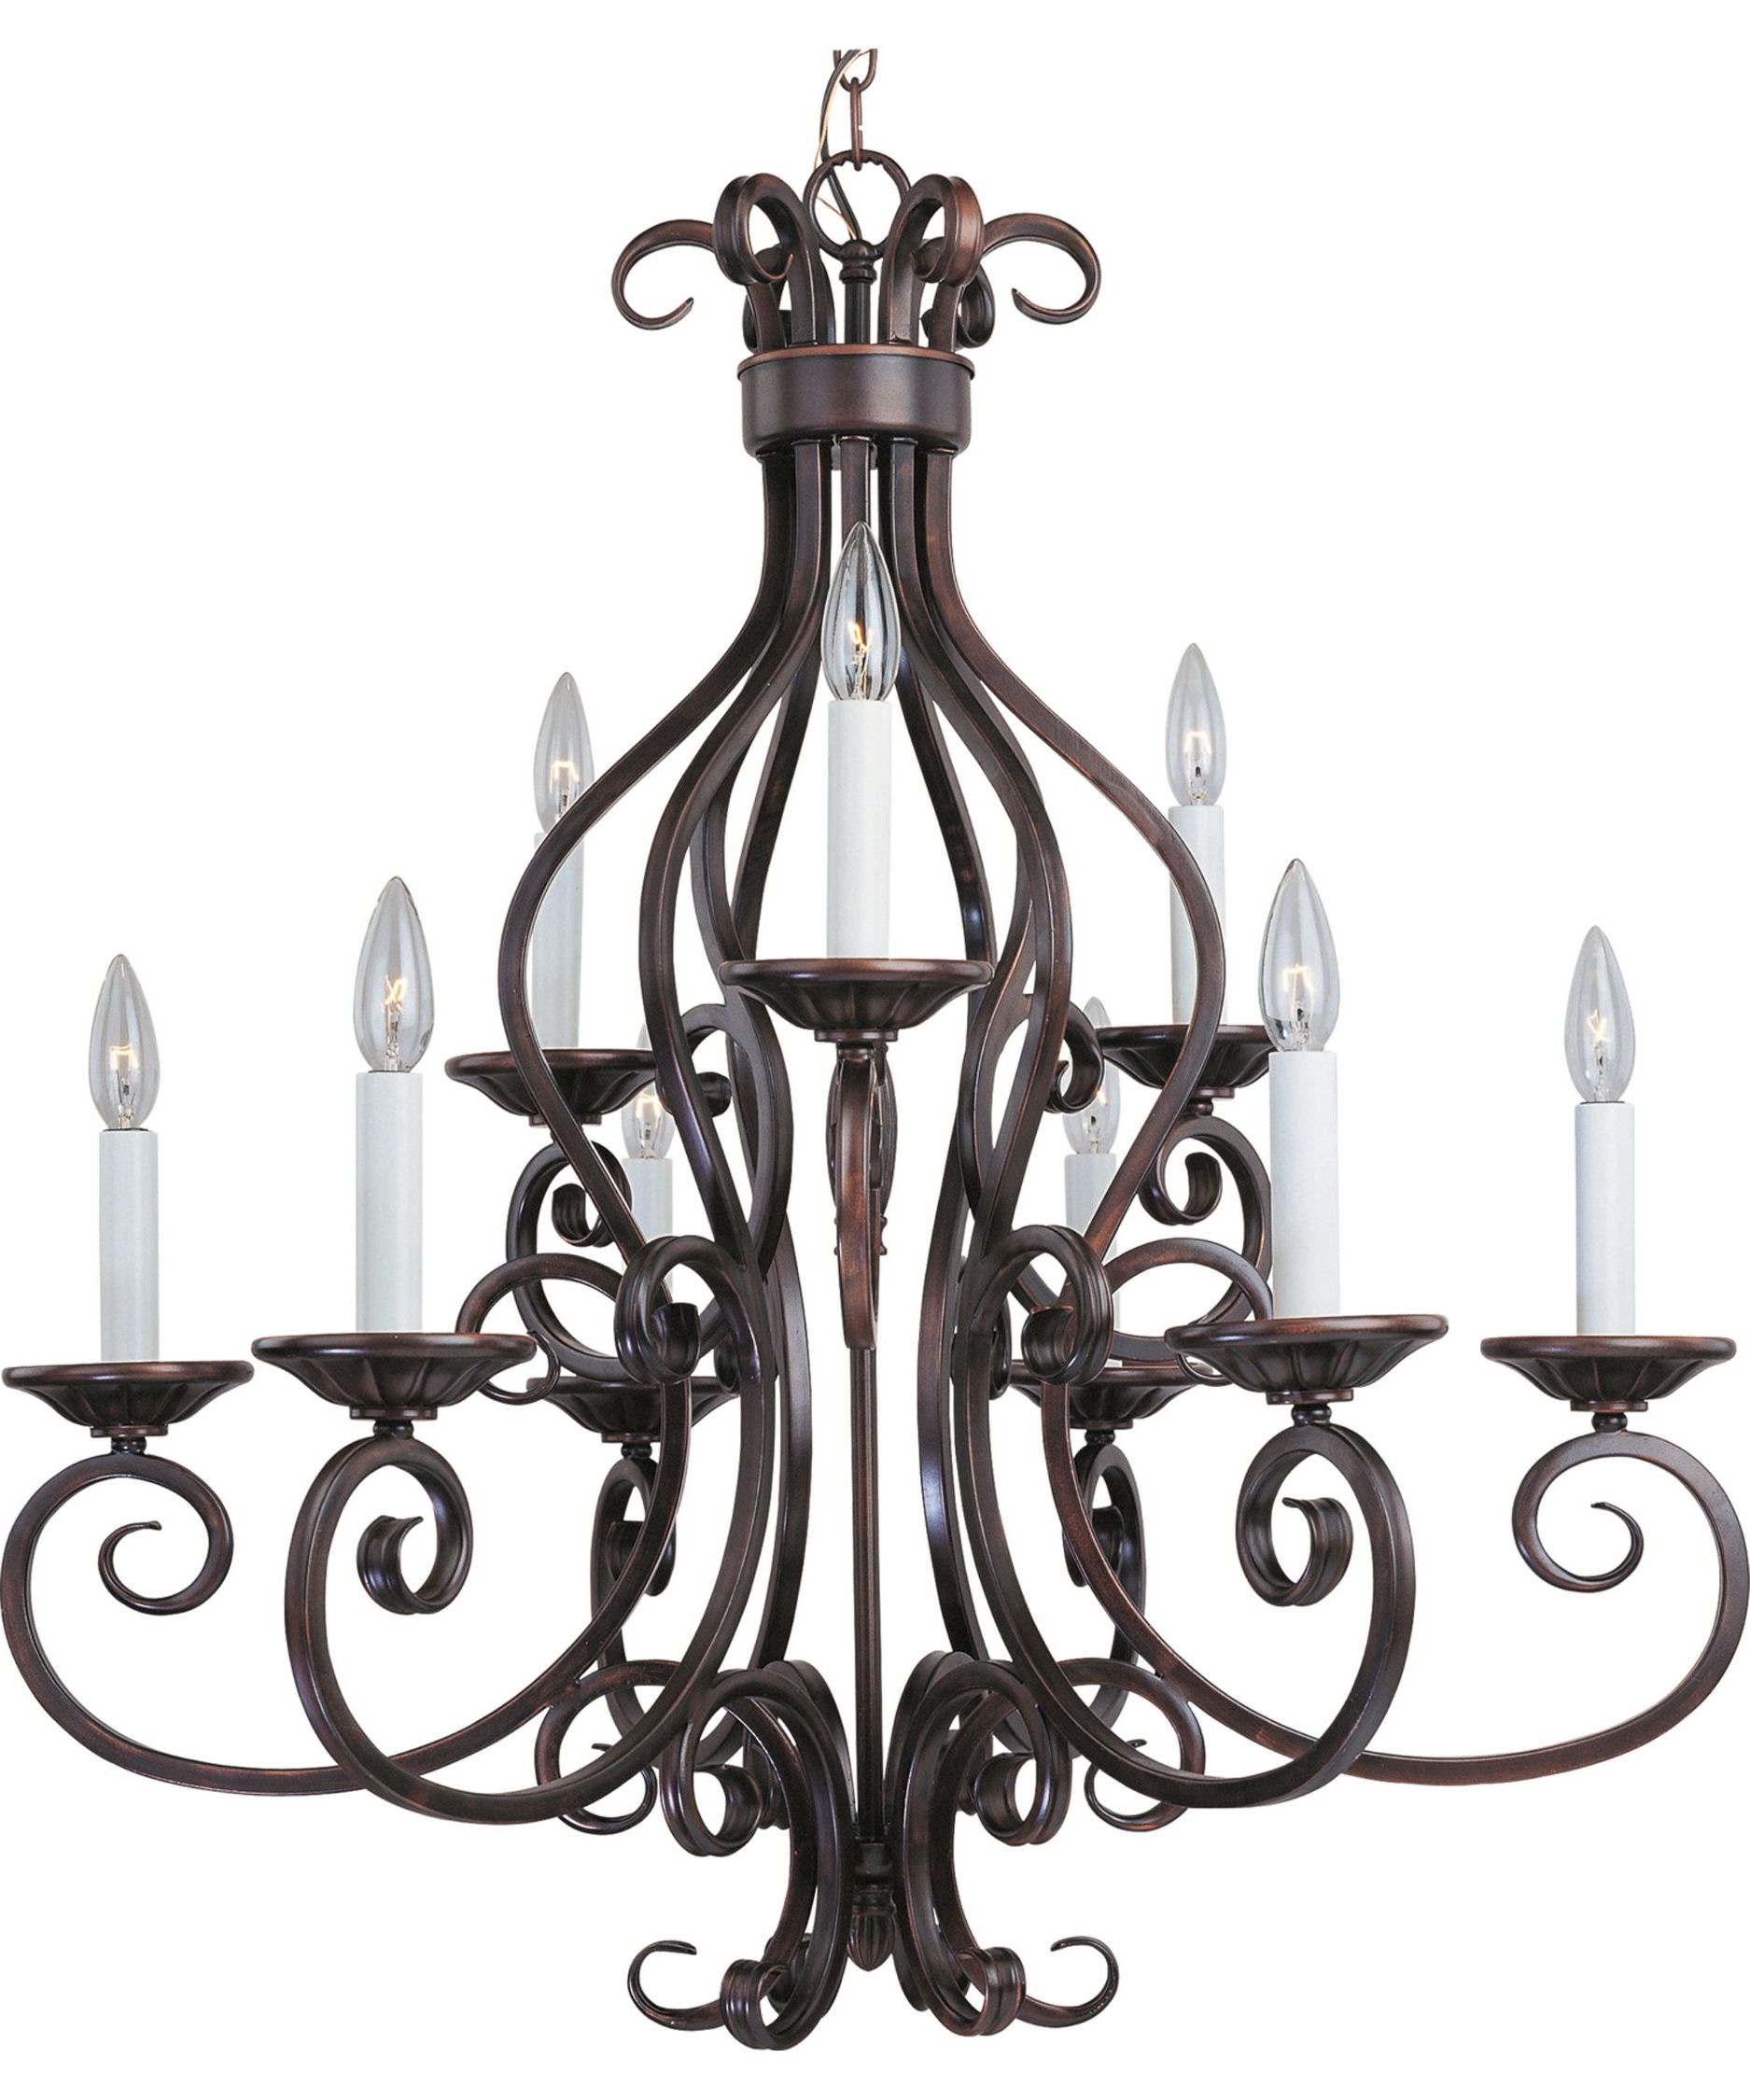 Most Recent Manor 29 Inch 9 Light Chandeliermaxim Lighting With Gaines 9 Light Candle Style Chandeliers (View 21 of 25)